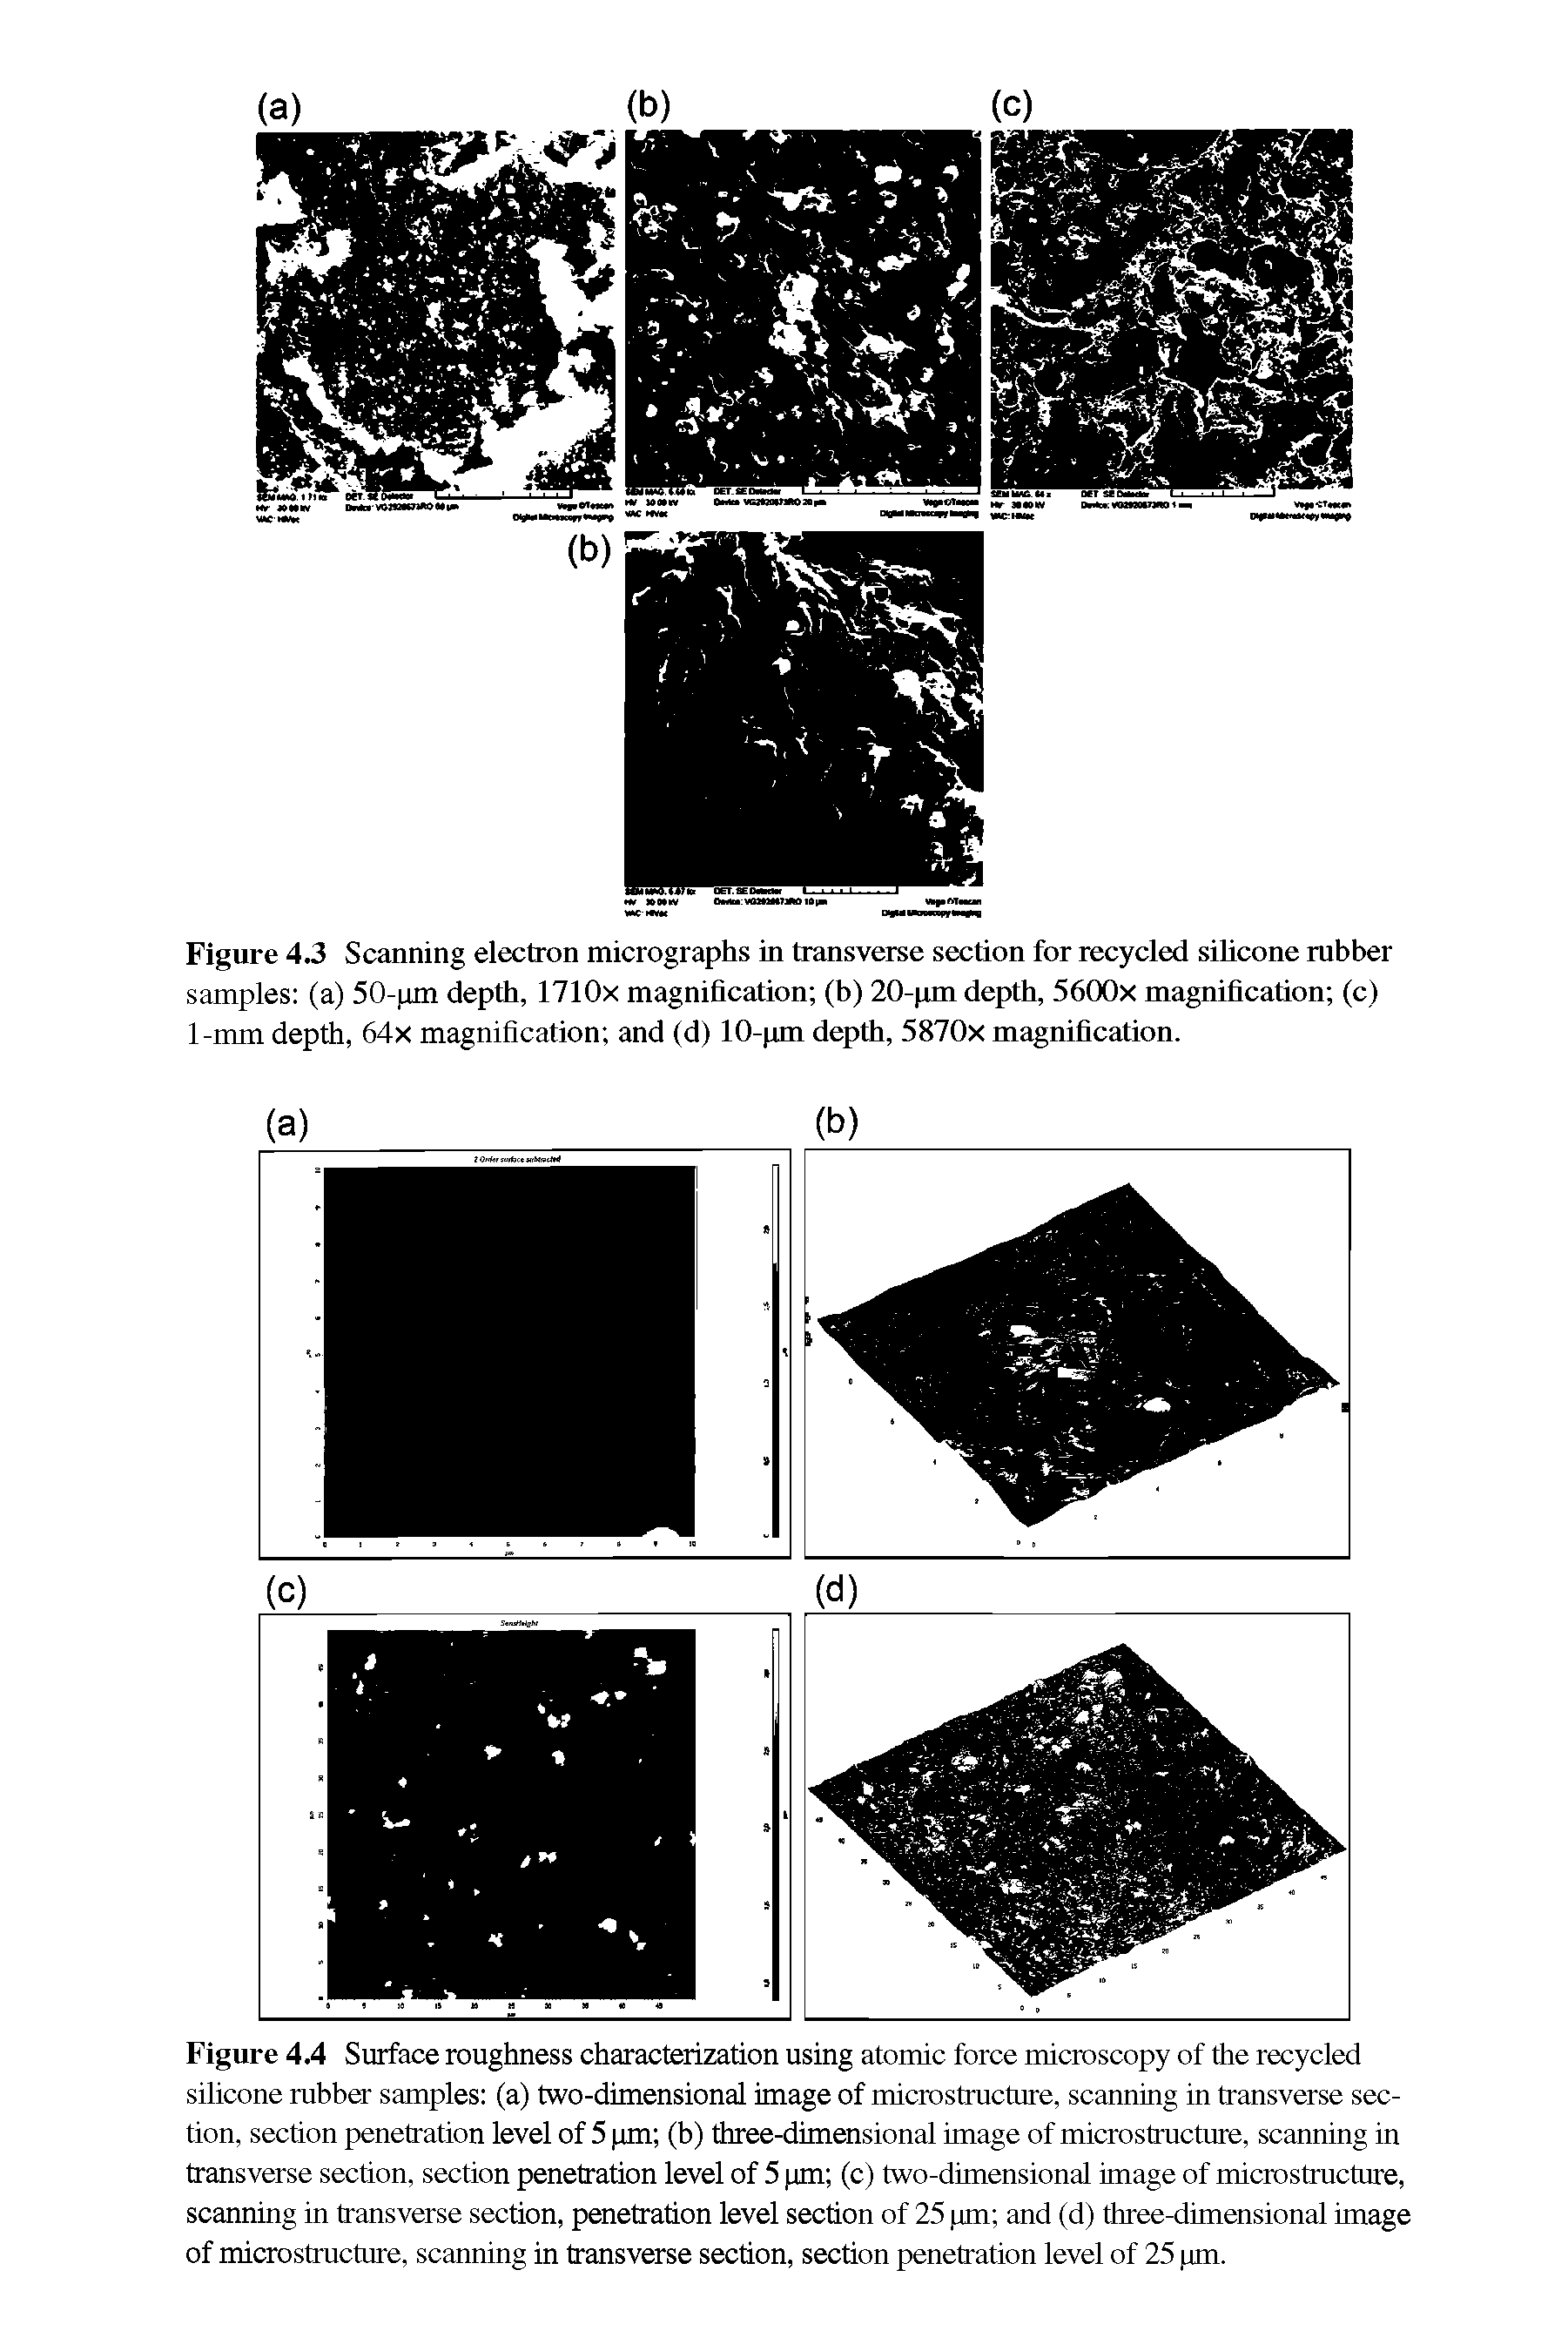 Figure 4.4 Surface roughness characterization using atomic force microscopy of the recycled silicone rubber samples (a) two-dimensional image of microstructure, scanning in transverse section, section penetration level of 5 pm (b) three-dimensional image of microstructure, scanning in transverse section, section penetration level of 5 pm (c) two-dimensional image of microstructure, scanning in hansverse section, penetration level section of 25 pm and (d) three-dimensional image of microstructure, scanning in transverse section, section penehation level of 25 pm.